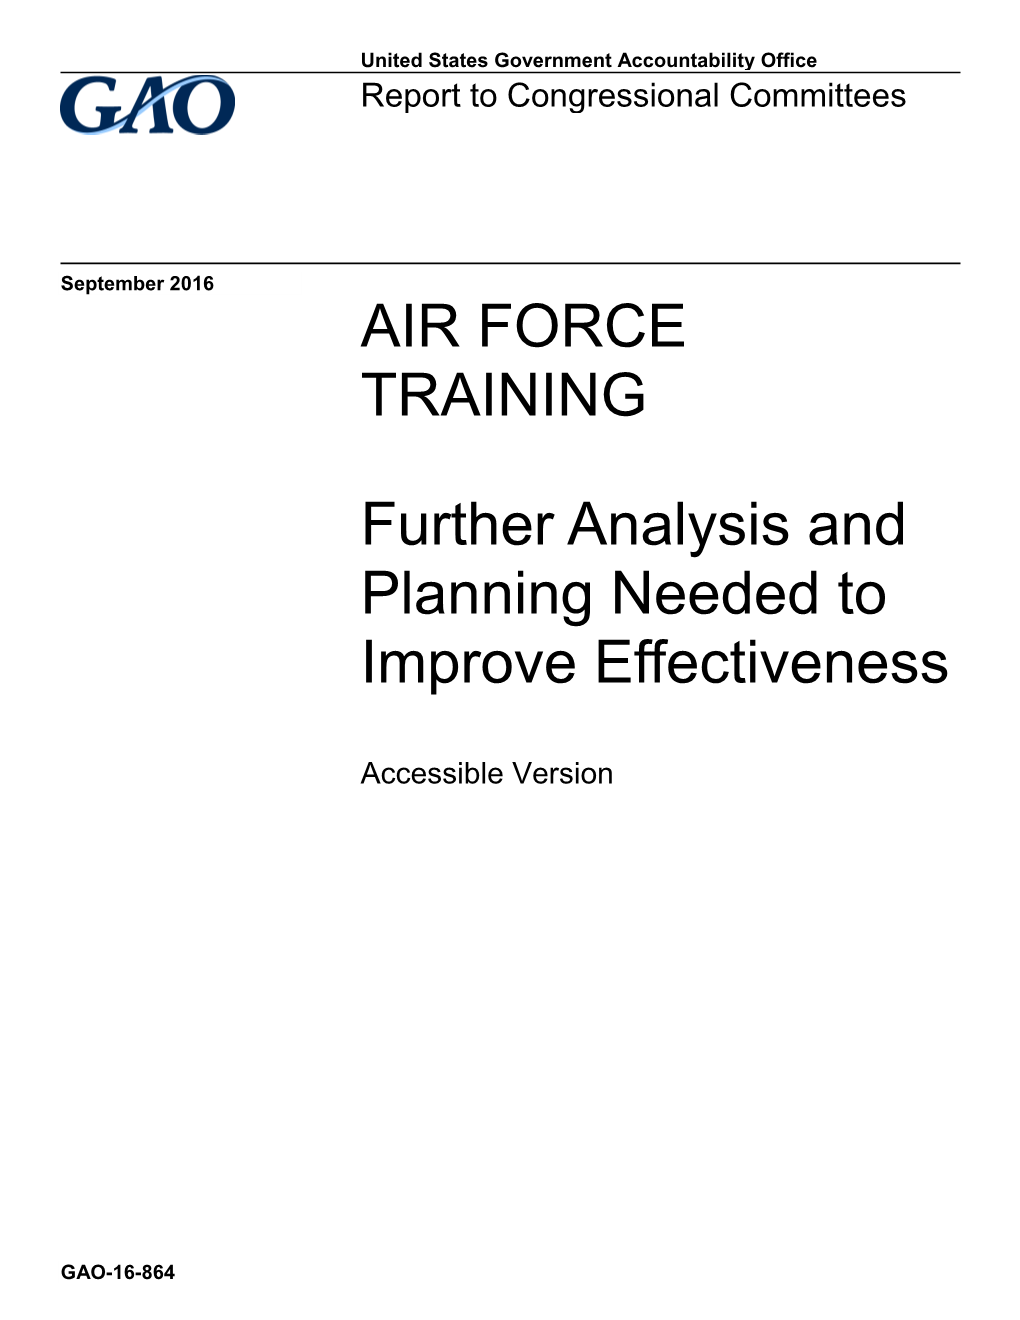 GAO-16-864, Accessible Version, Air Force Training